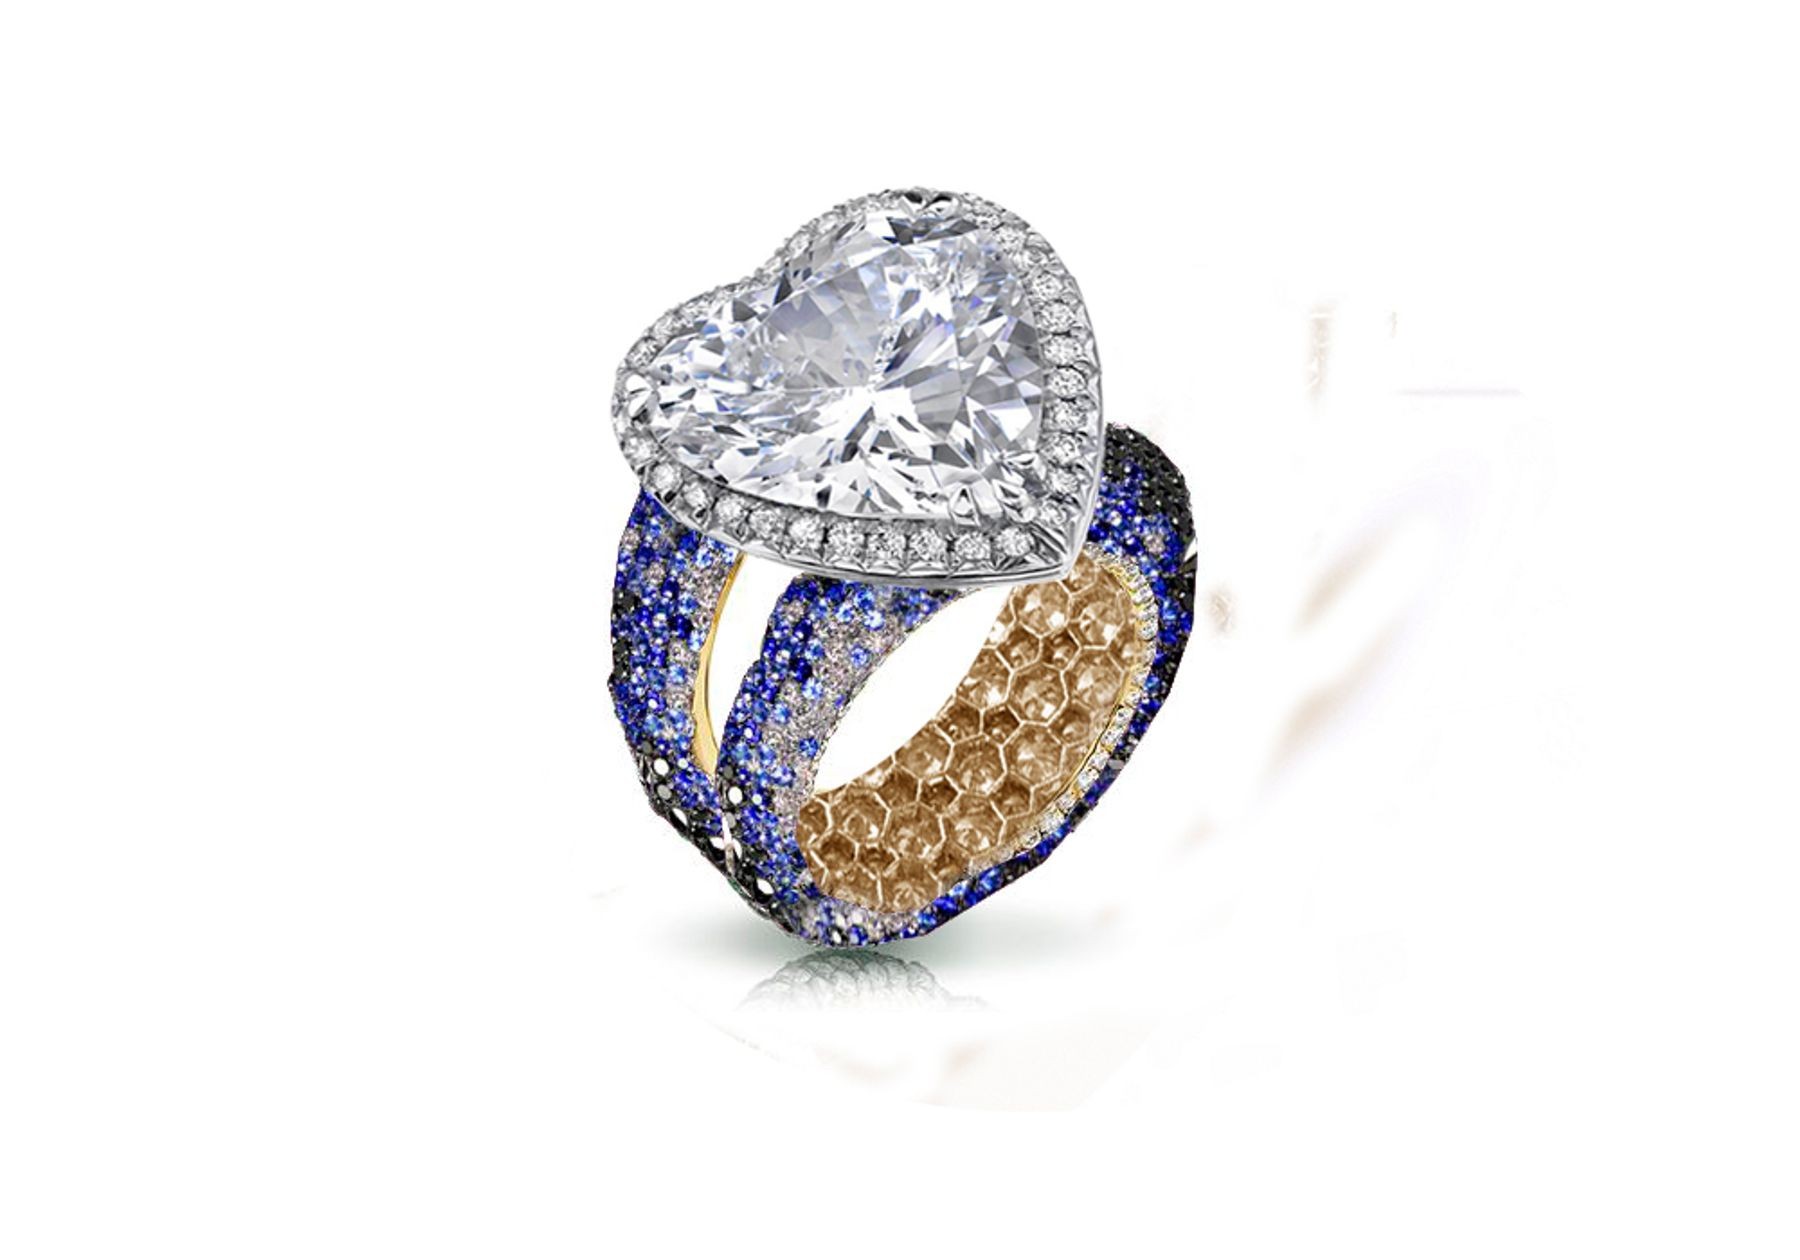 Halo Heart Diamond Ring with Diamonds & Blue Sapphires in Gold or Platinum